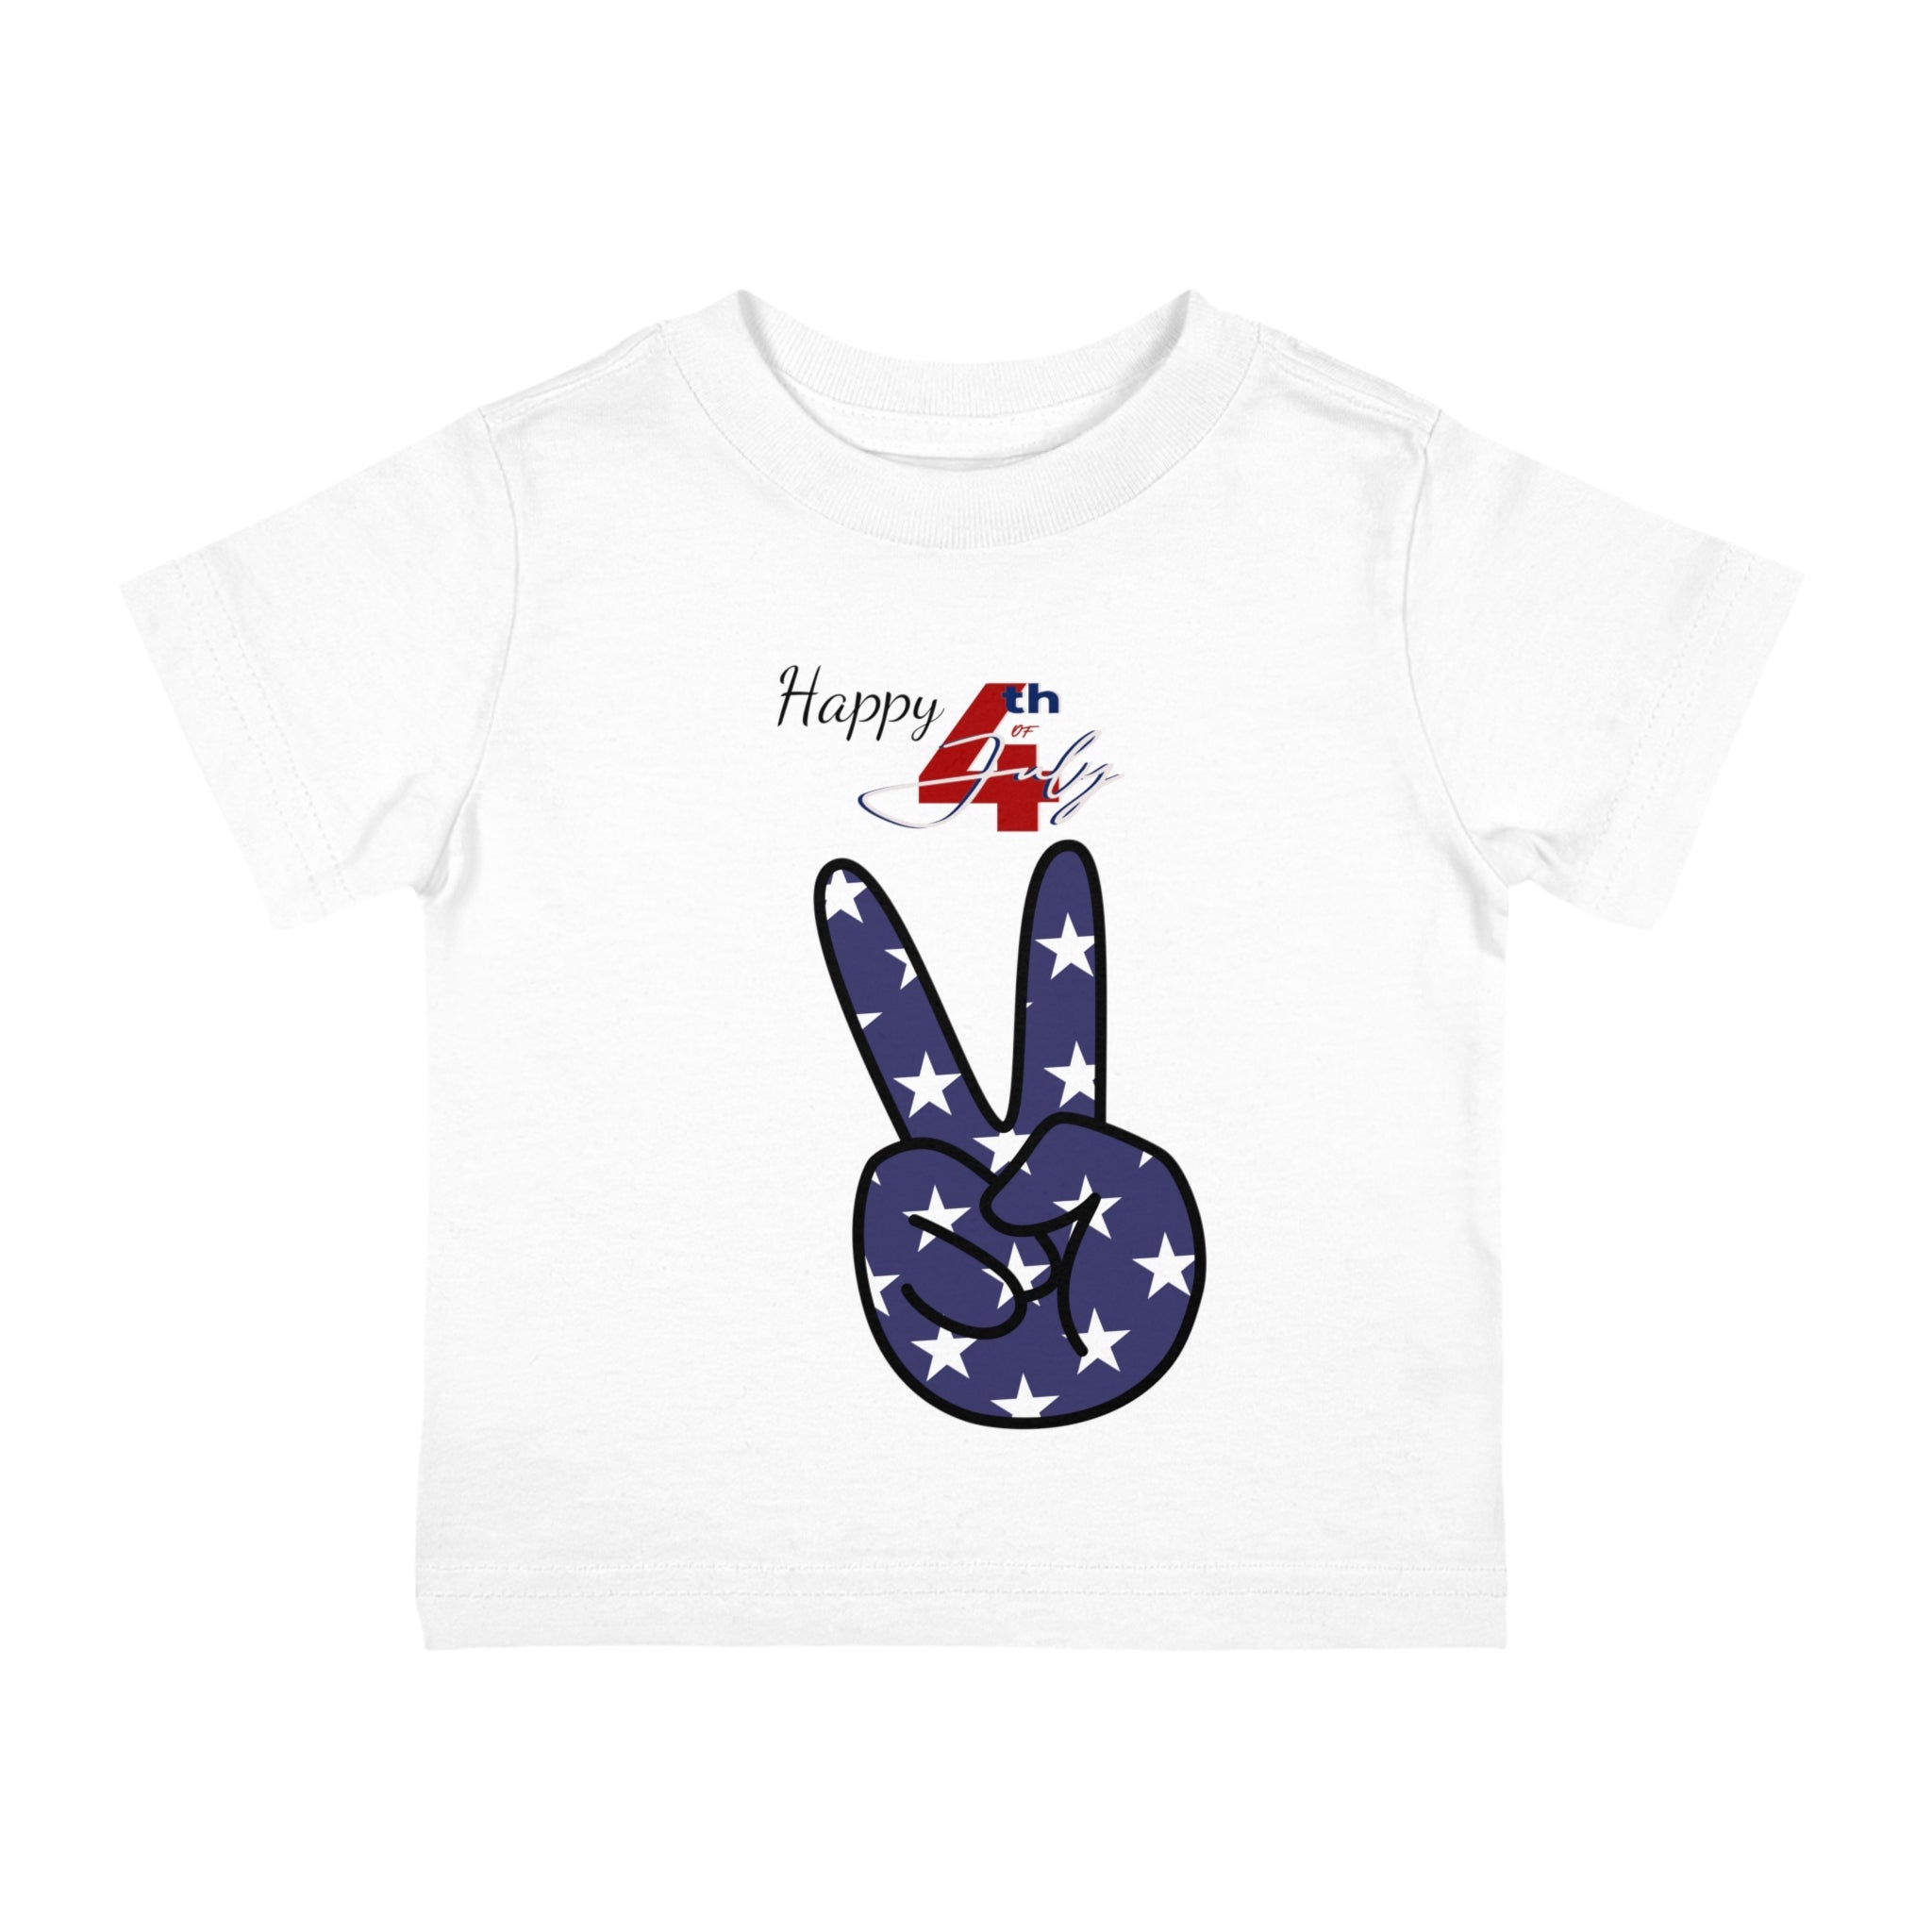 Happy 4th of July Piece Design Infant Shirt, Baby Tee, Infant Tee